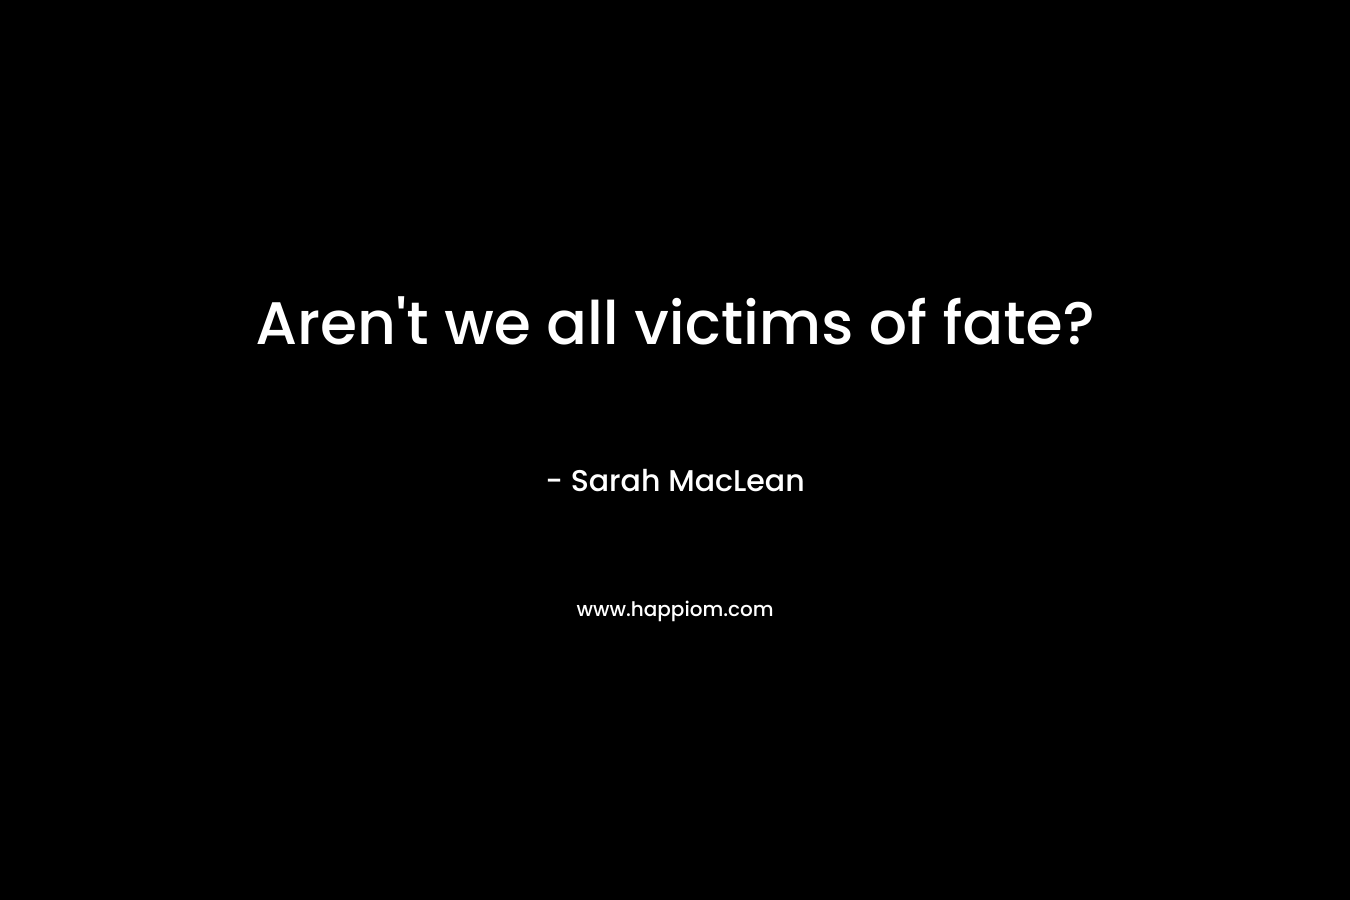 Aren't we all victims of fate?